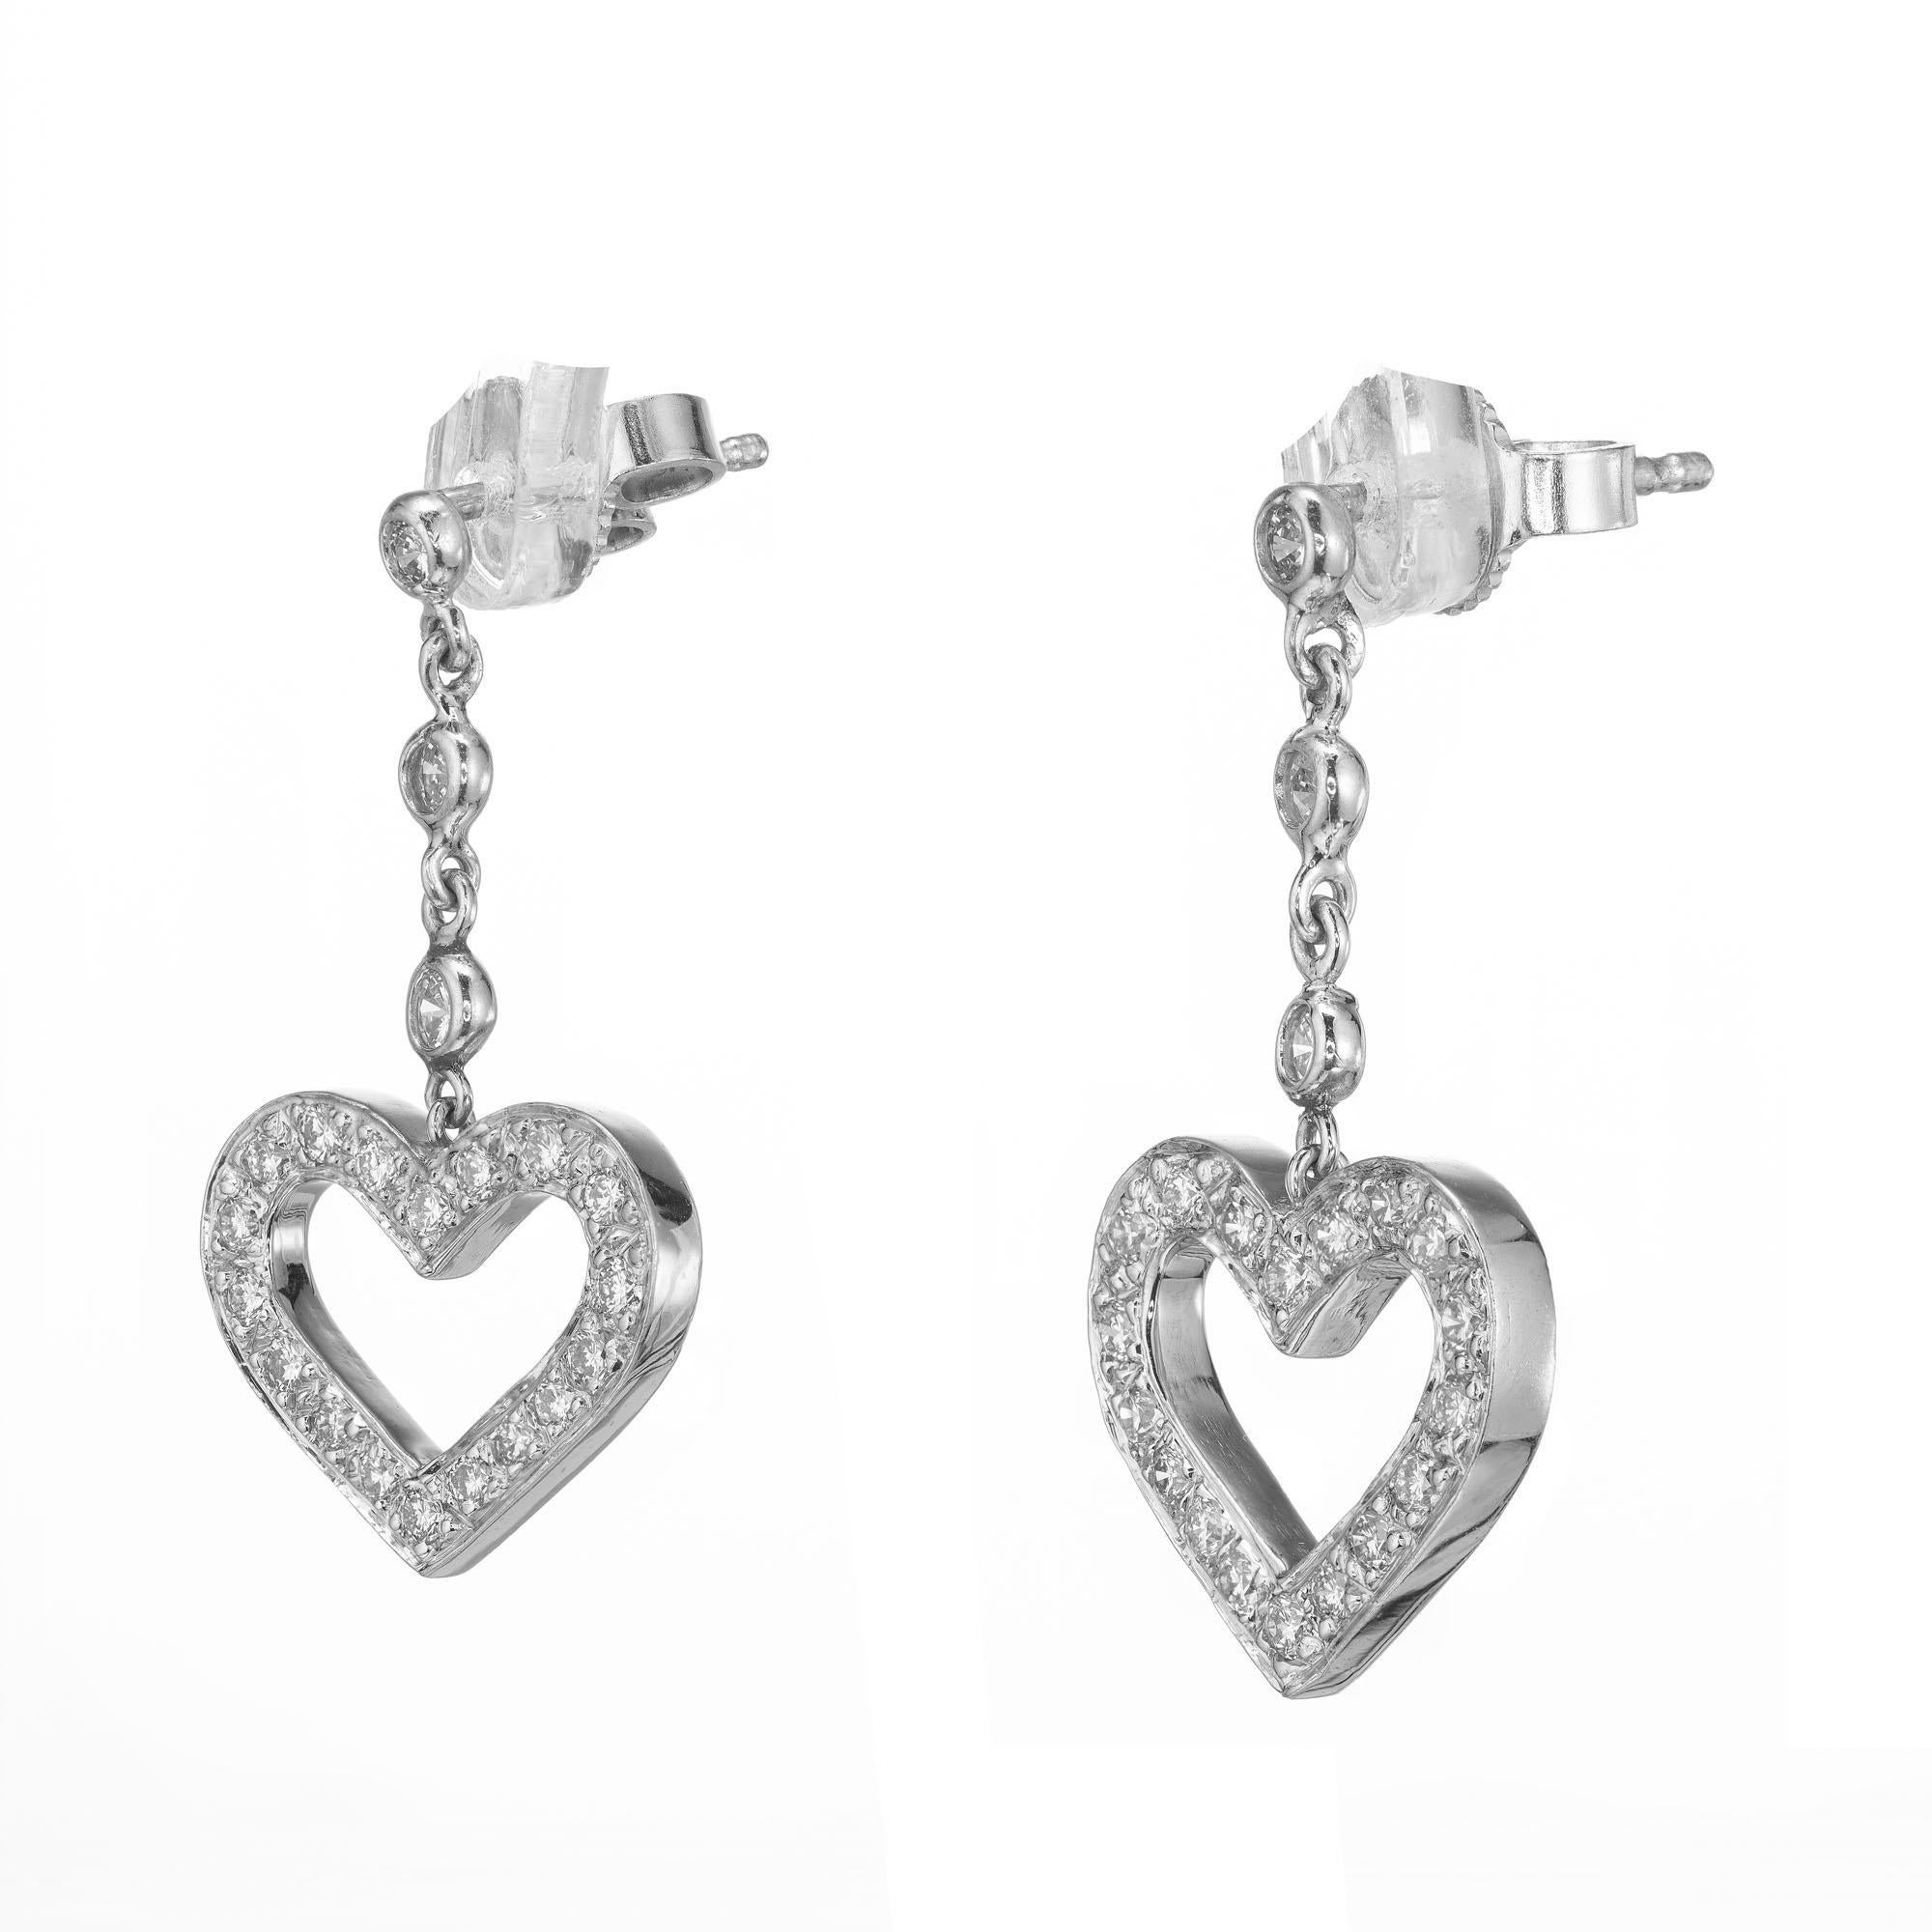 Diamond dangle drop heart earrings. Set in 18k white gold with diamond framed heart dangles. 

42 round diamonds approx total weight. .60 F, VS
Length: .98 inches or 25.04mm
Width: .54 inches or 13.91mm
Stamped: 18k White gold